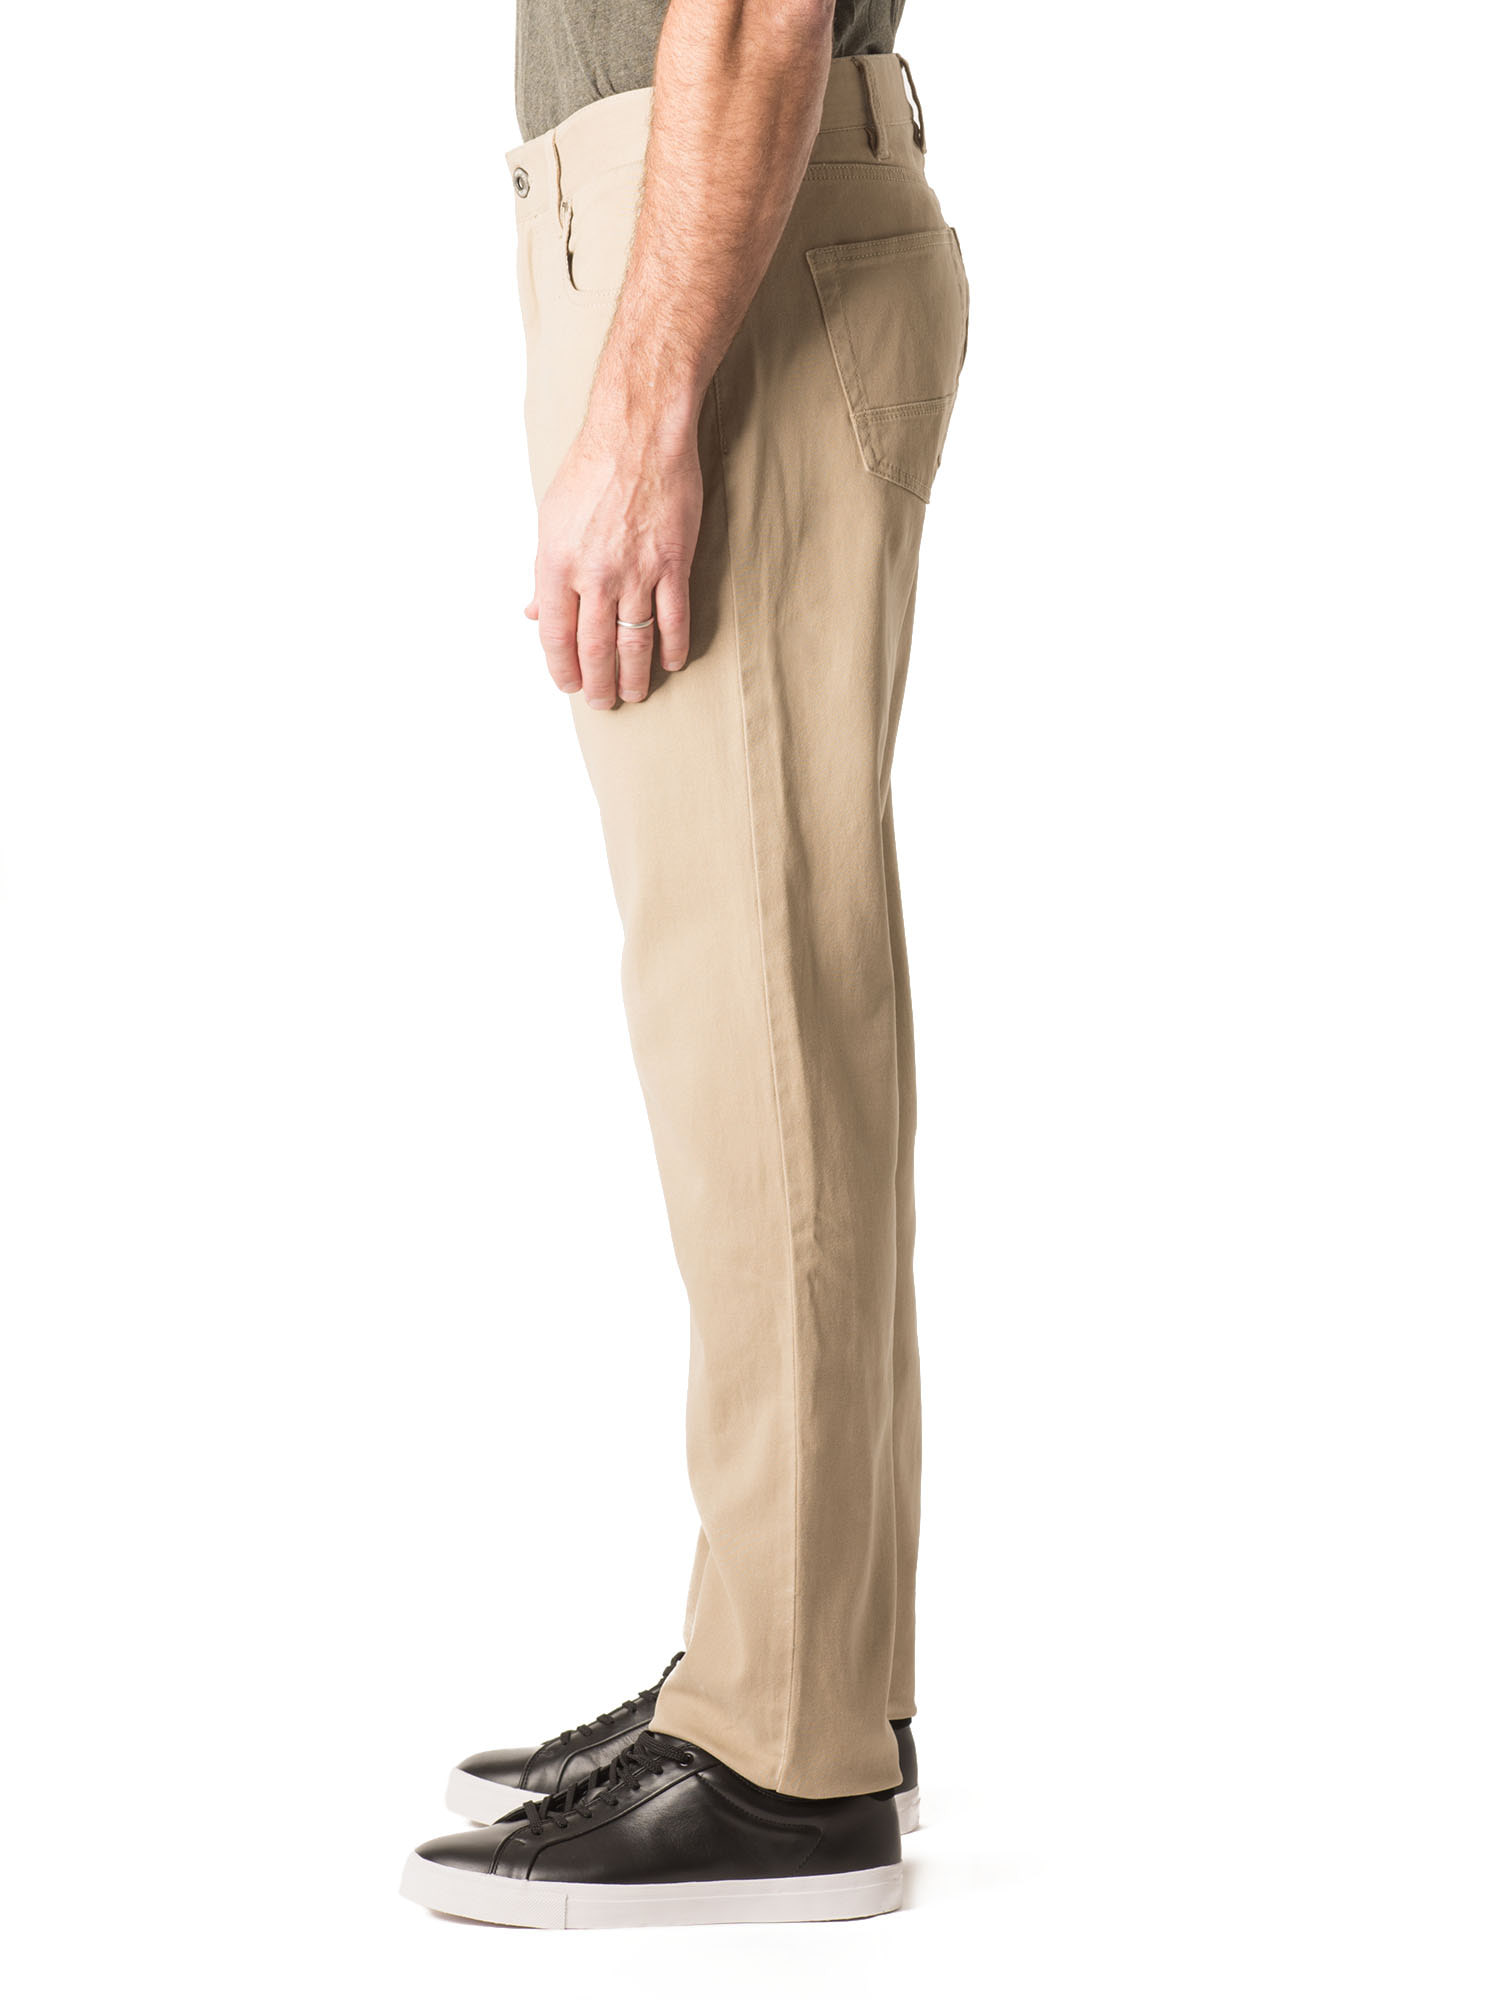 PATRIOT” 5 Pocket Stretch Twill Pant with Flex Inner waistband – Iron  Clothing Co.